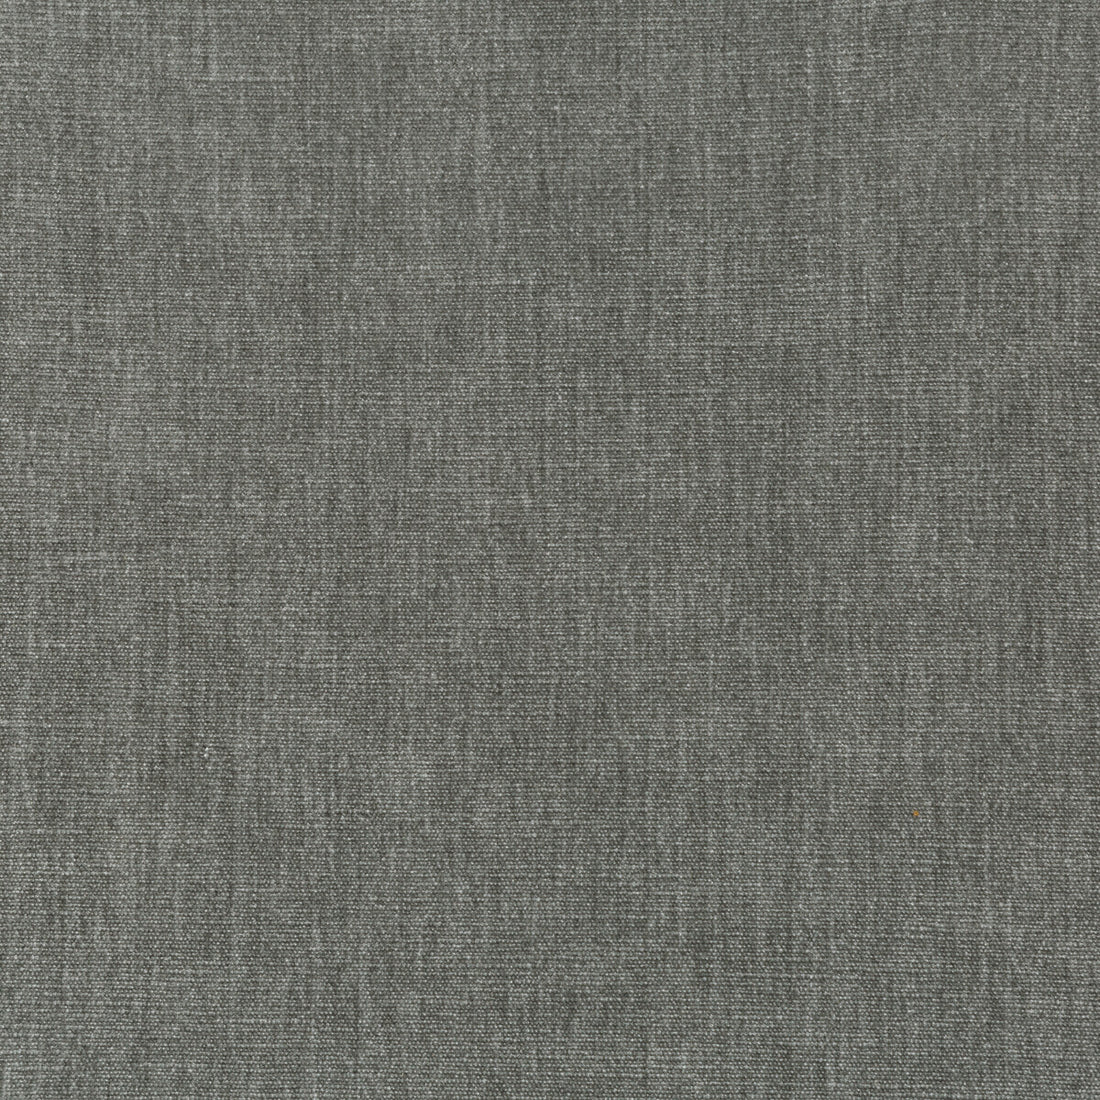 Kravet Smart fabric in 36076-21 color - pattern 36076.21.0 - by Kravet Smart in the Sumptuous Chenille II collection